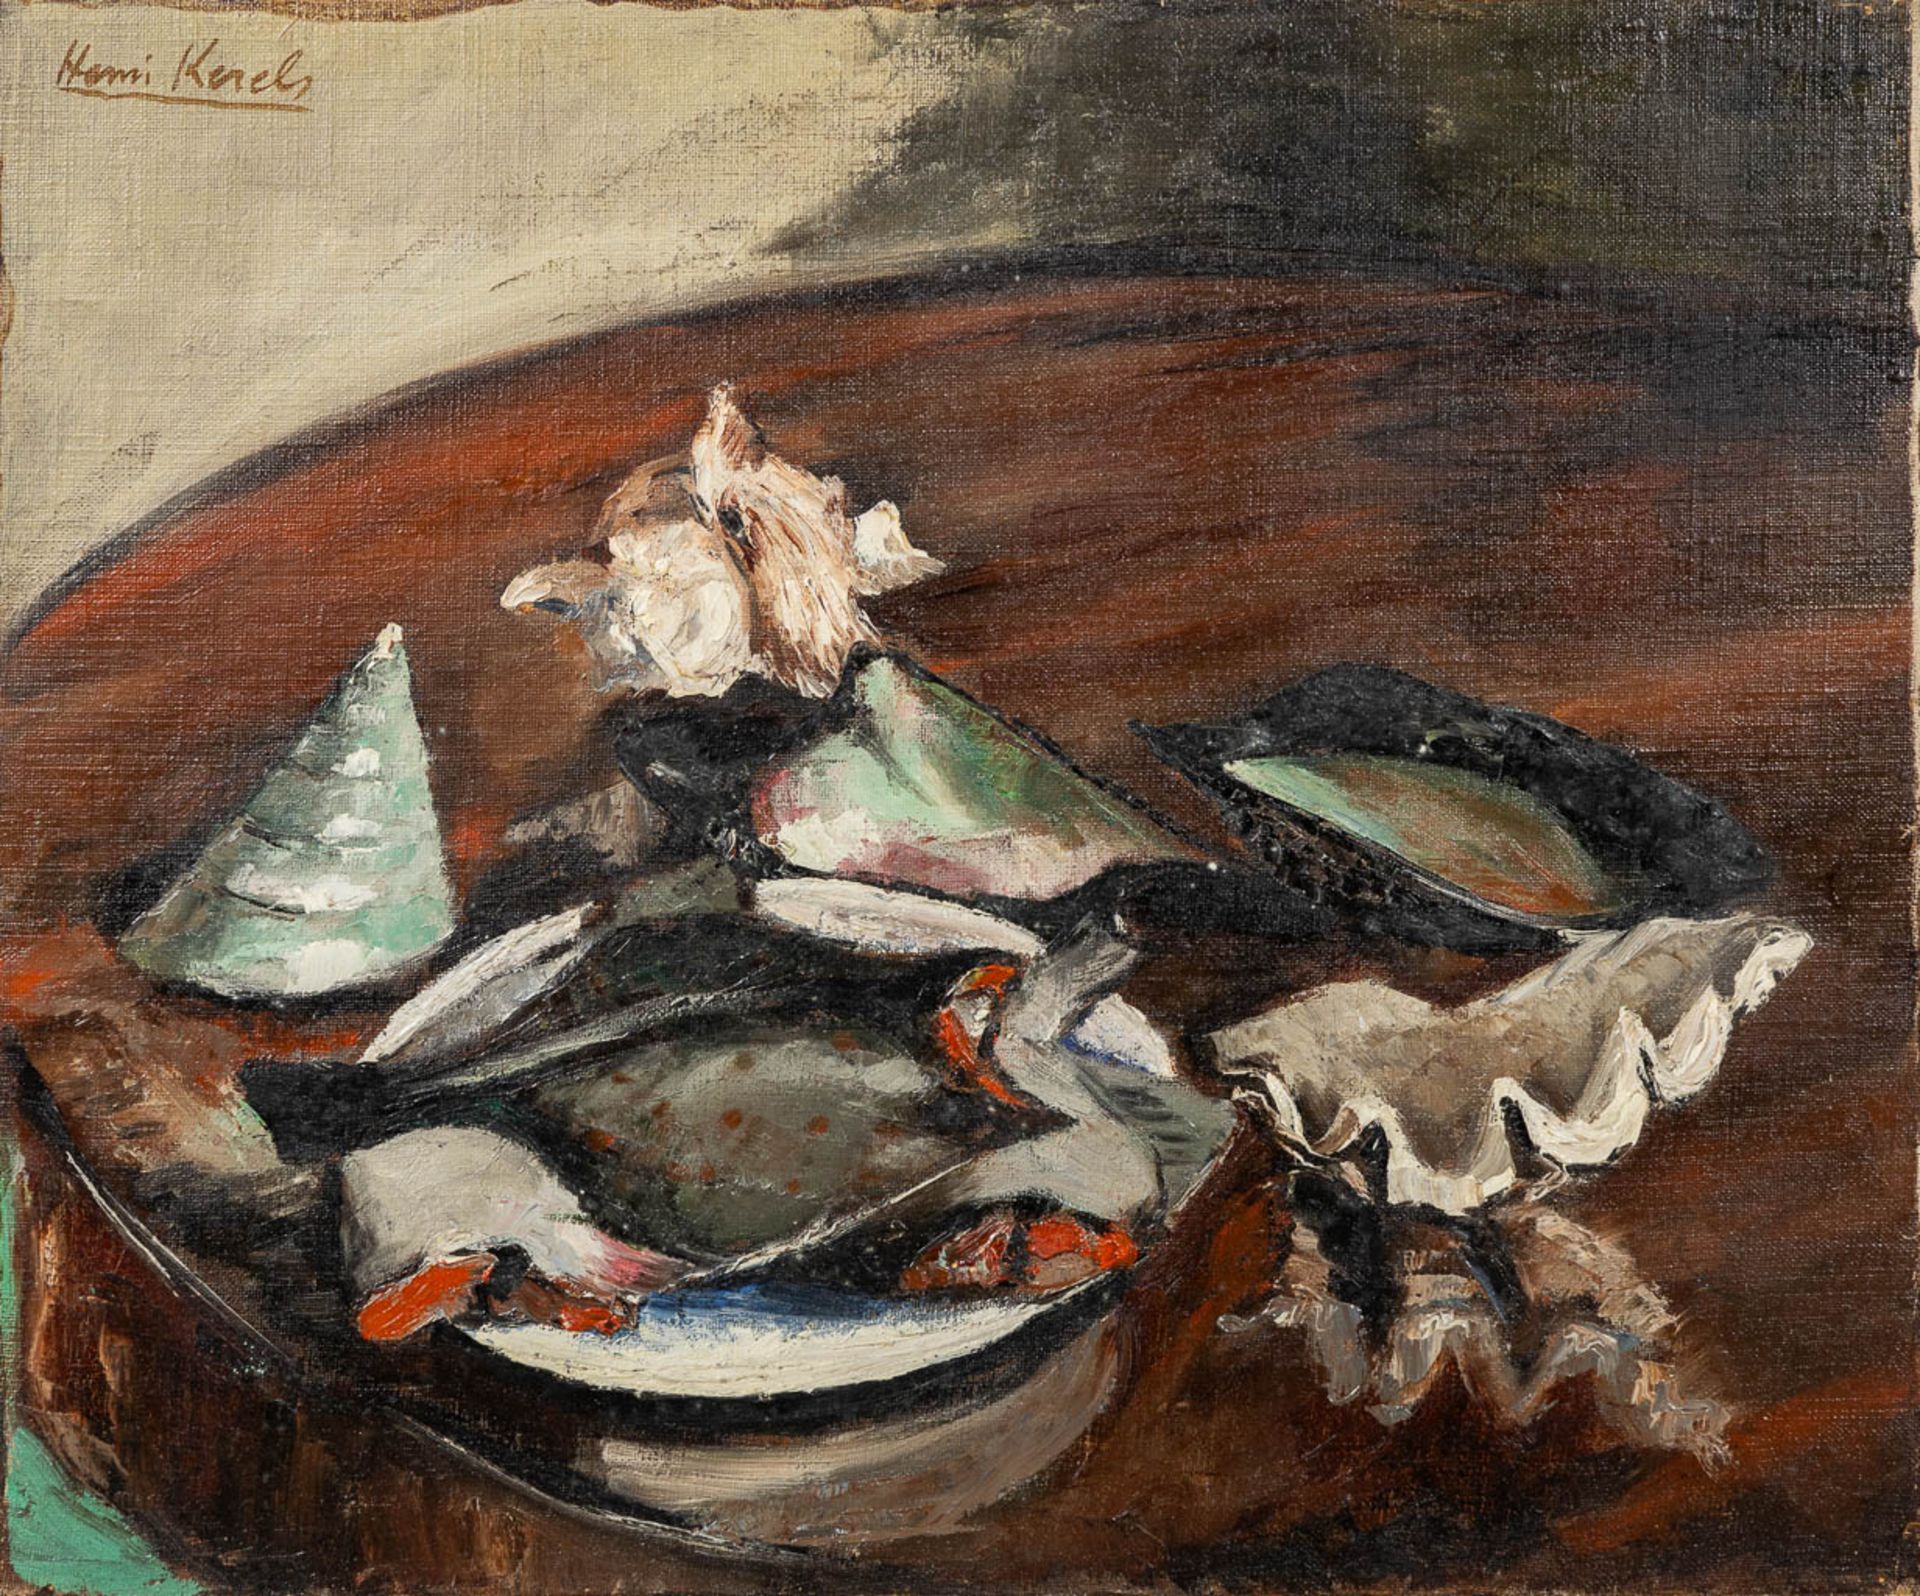 Henri KERELS (1896-1956) 'Still life with Mussles and Flatfish' oil on canvas. (W:60 x H:50 cm)